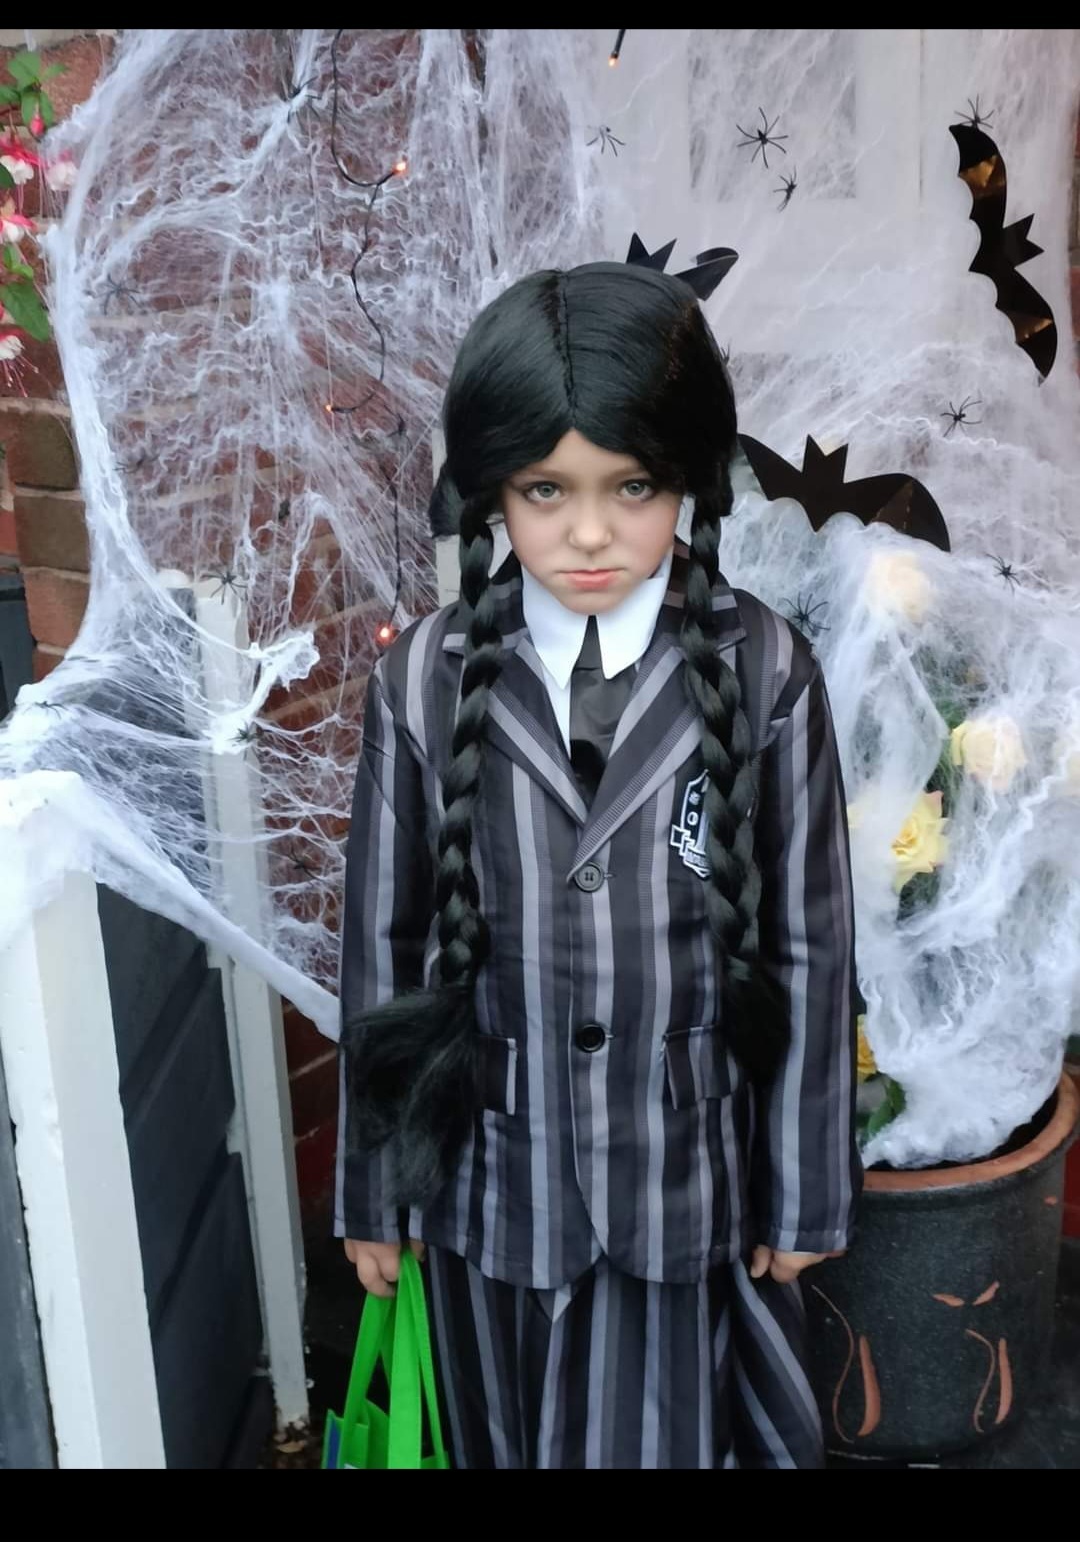 Georgie Webster from Northwich as Wednesday Addams